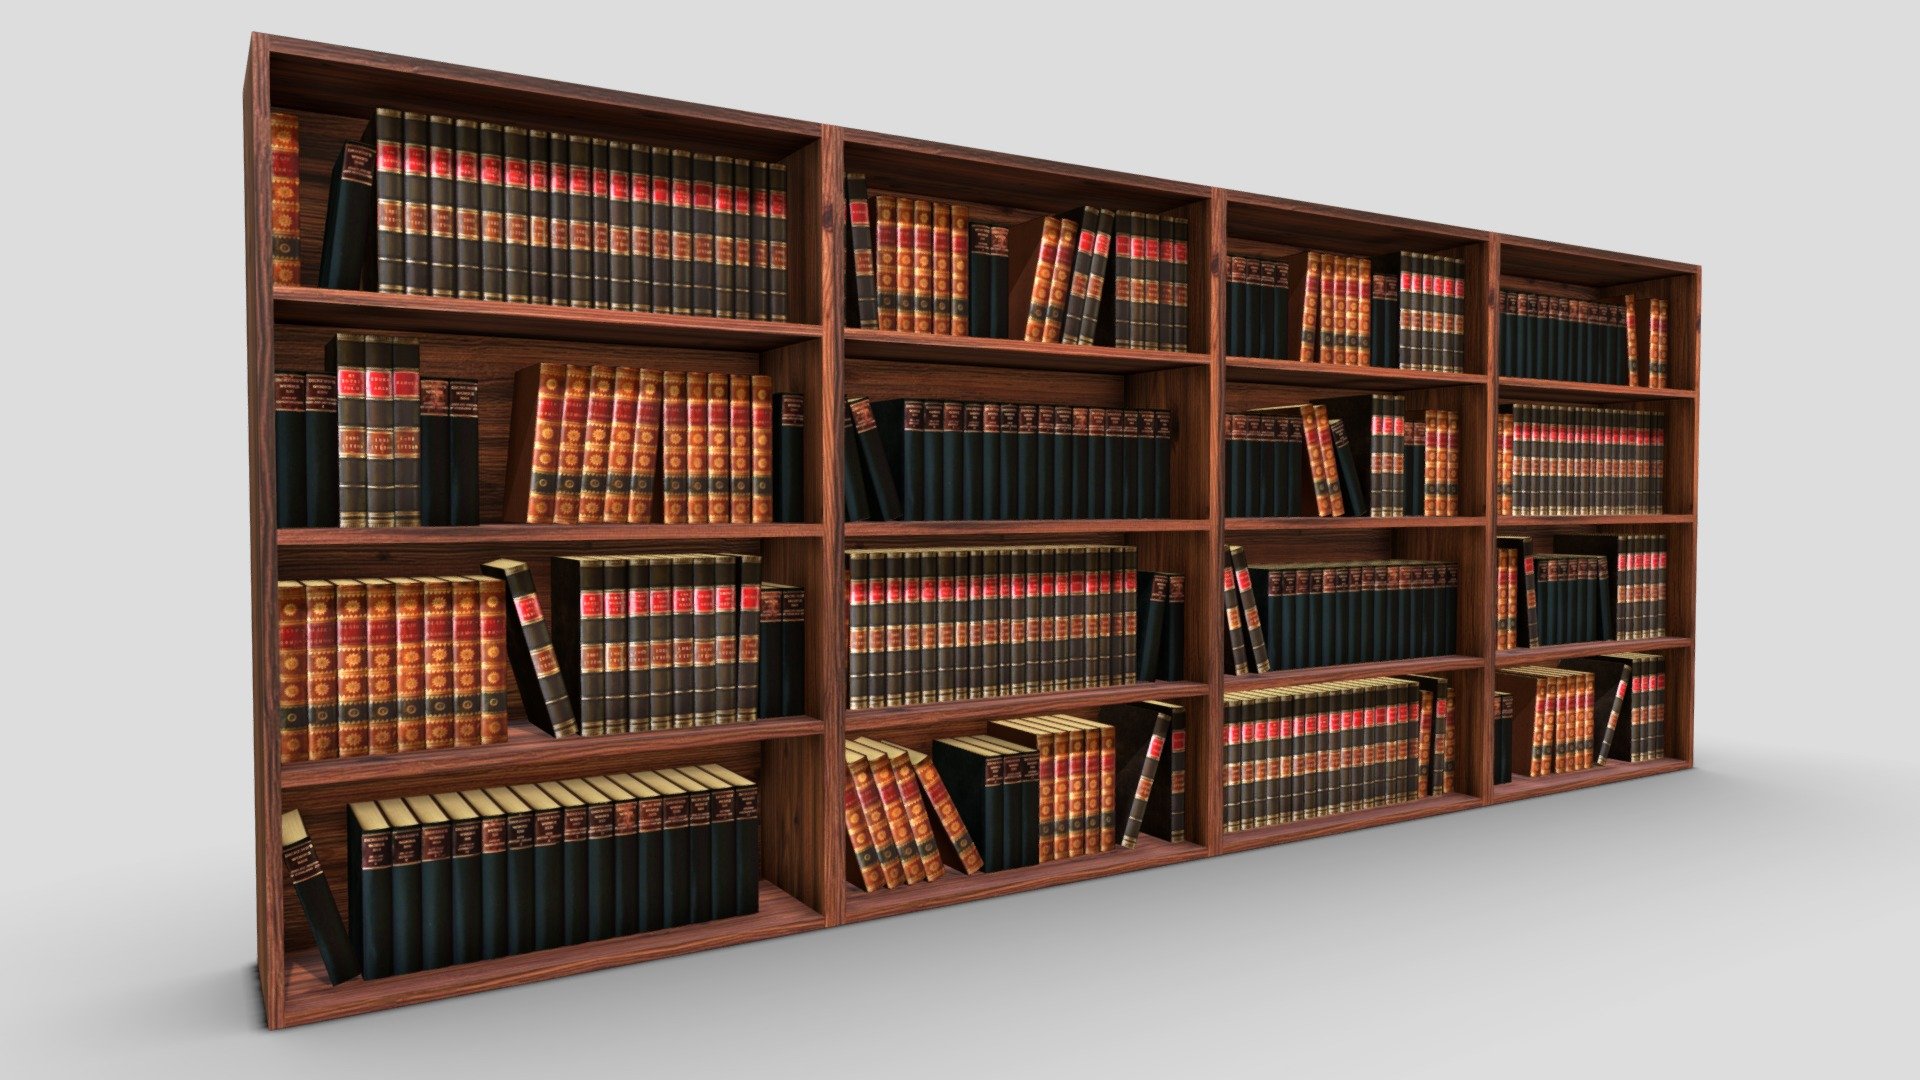 Low-poly bookshelf with classic books, perfect for all sorts of 3D projects and game engines. The asset pack includes shelf, book sets blocks, and individual book models. The models come with PBR textures including colour, spec, roughness, normal, and AO. All textures are 2048 x 2048 px 3d model